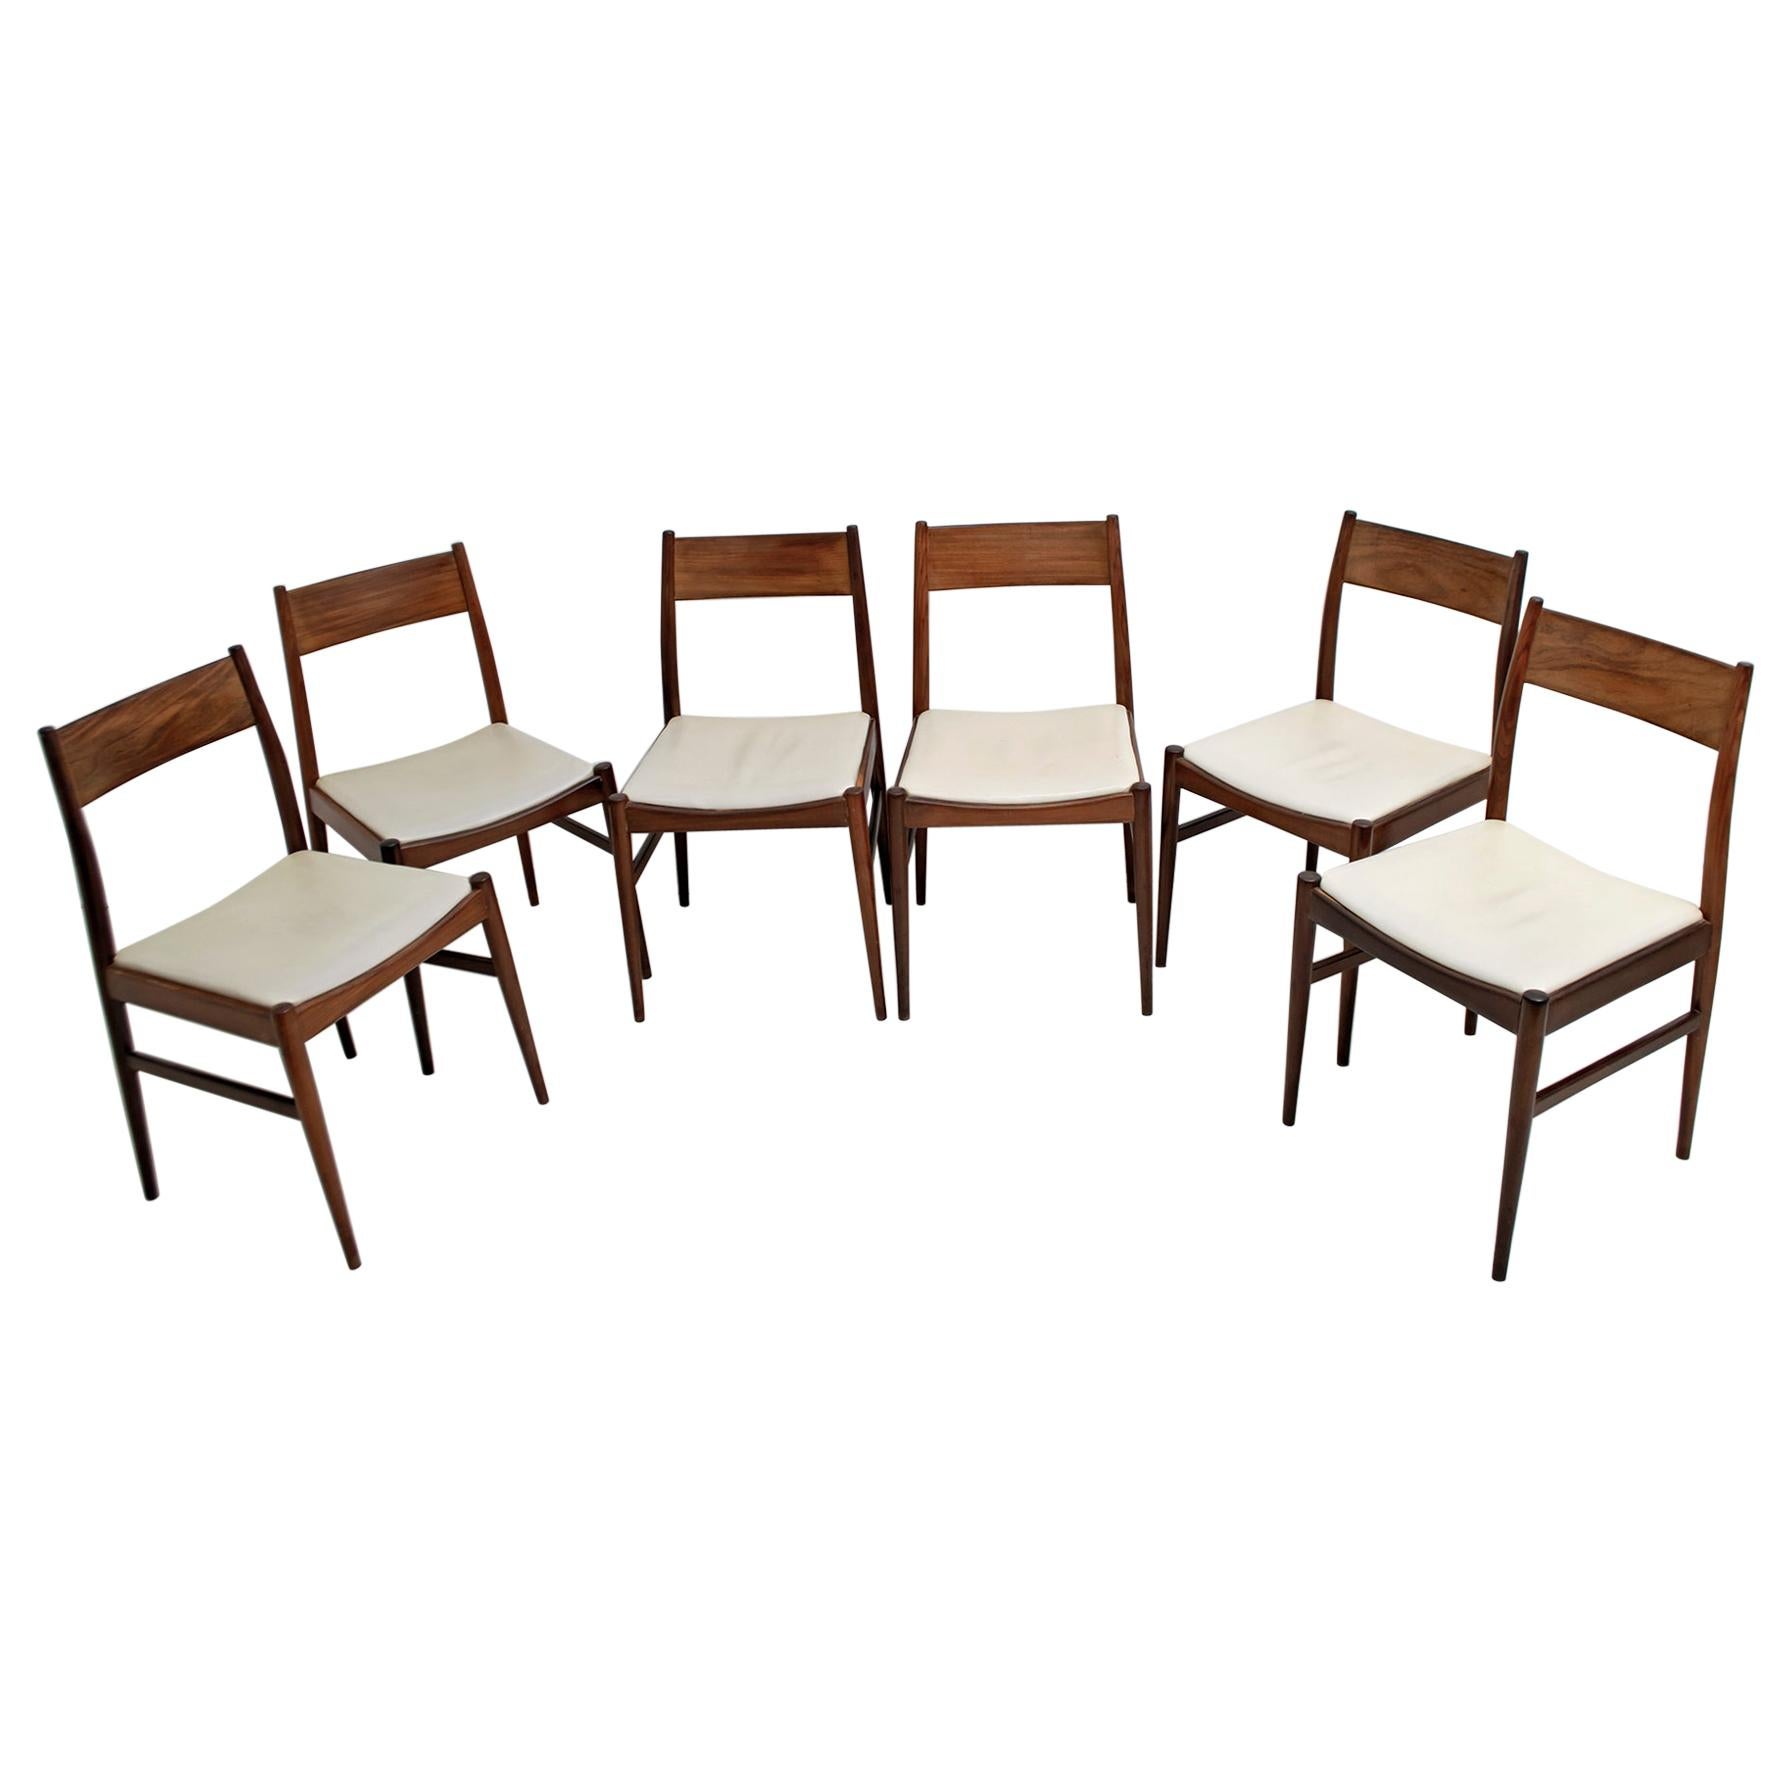 Set of Six Chairs by Gianfranco Frattini Teak Vintage, Italy, 1960s